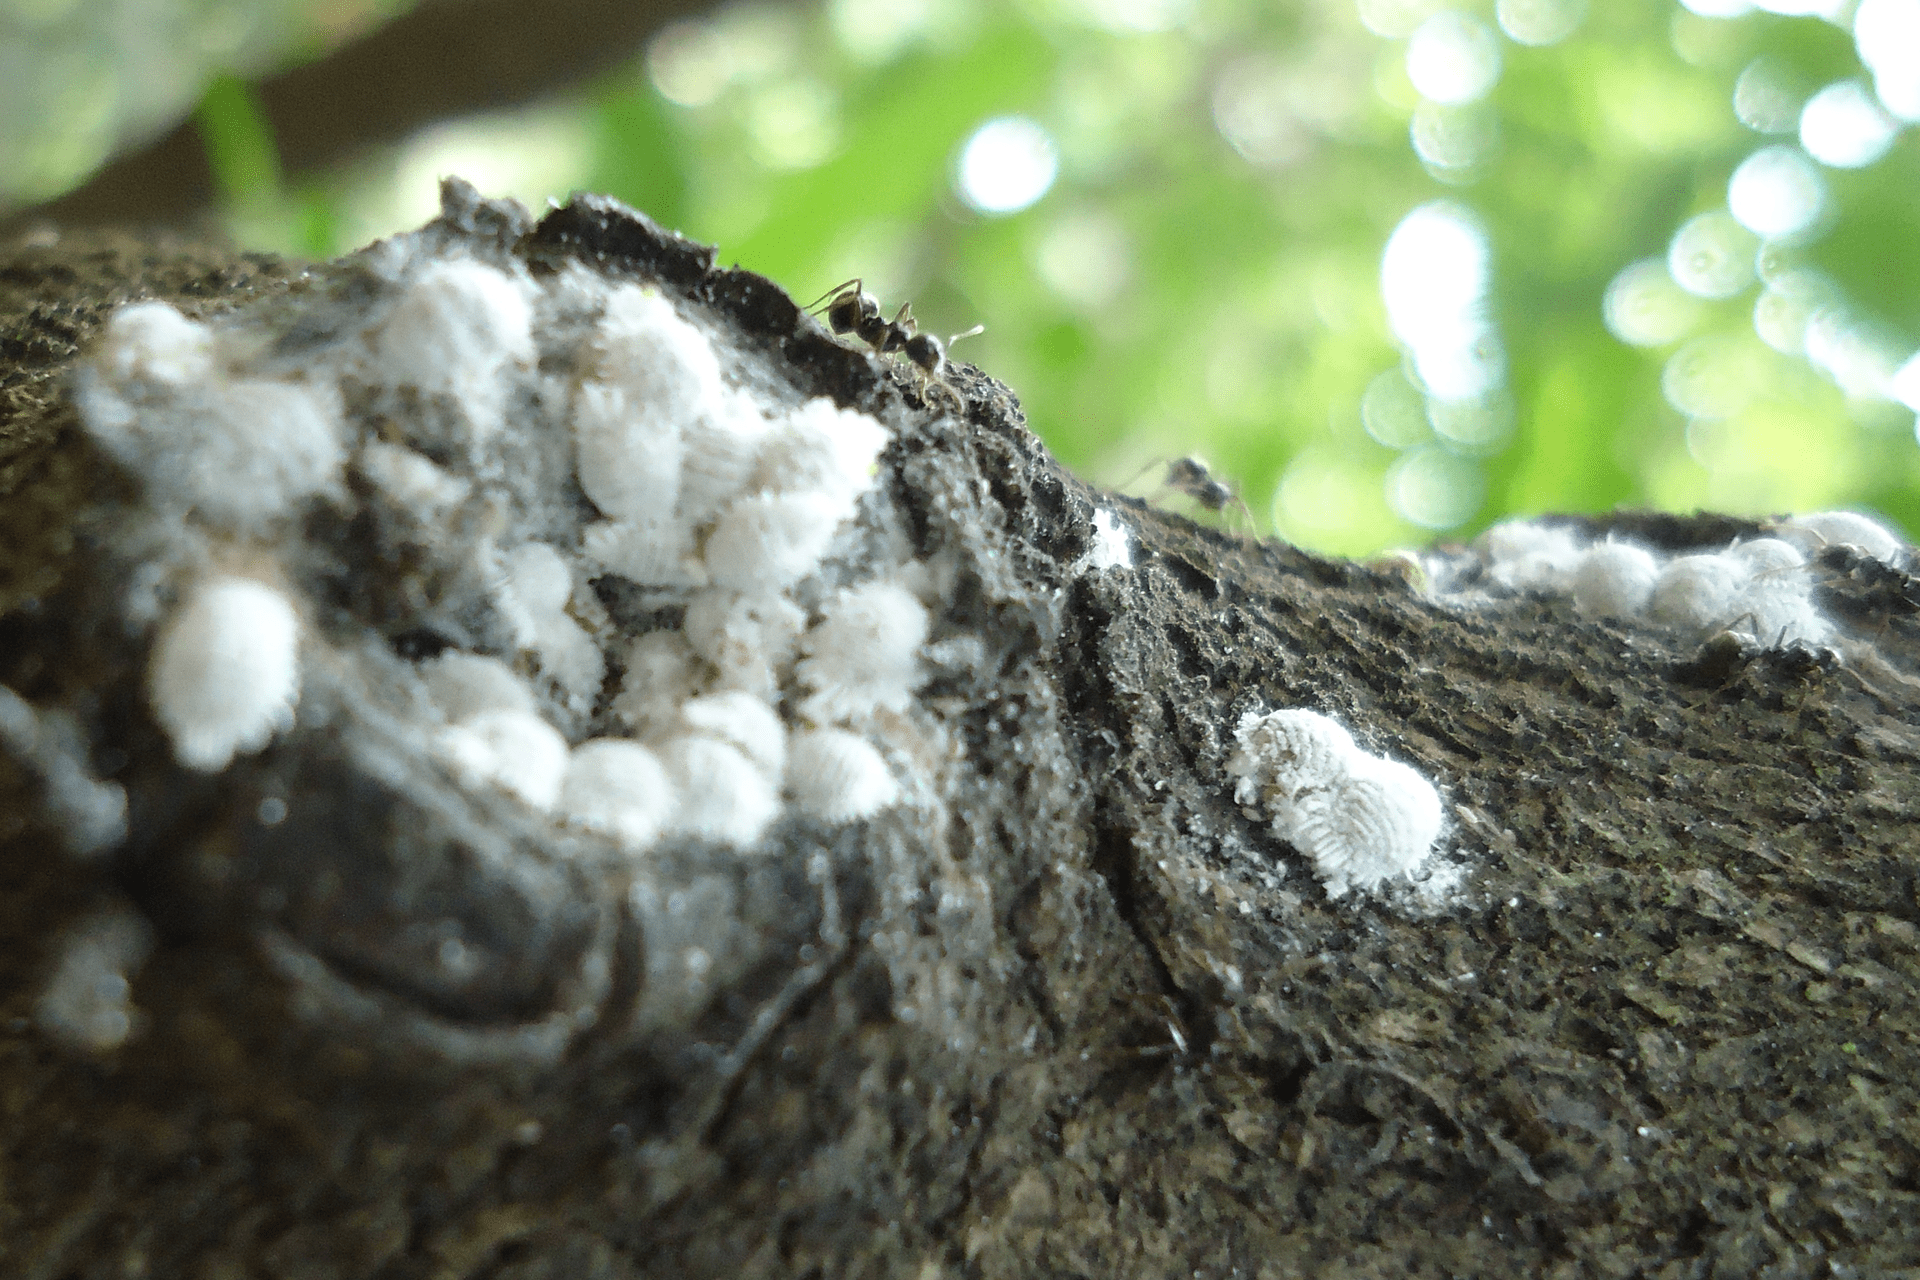 The trunk of a tree covered in scale insects